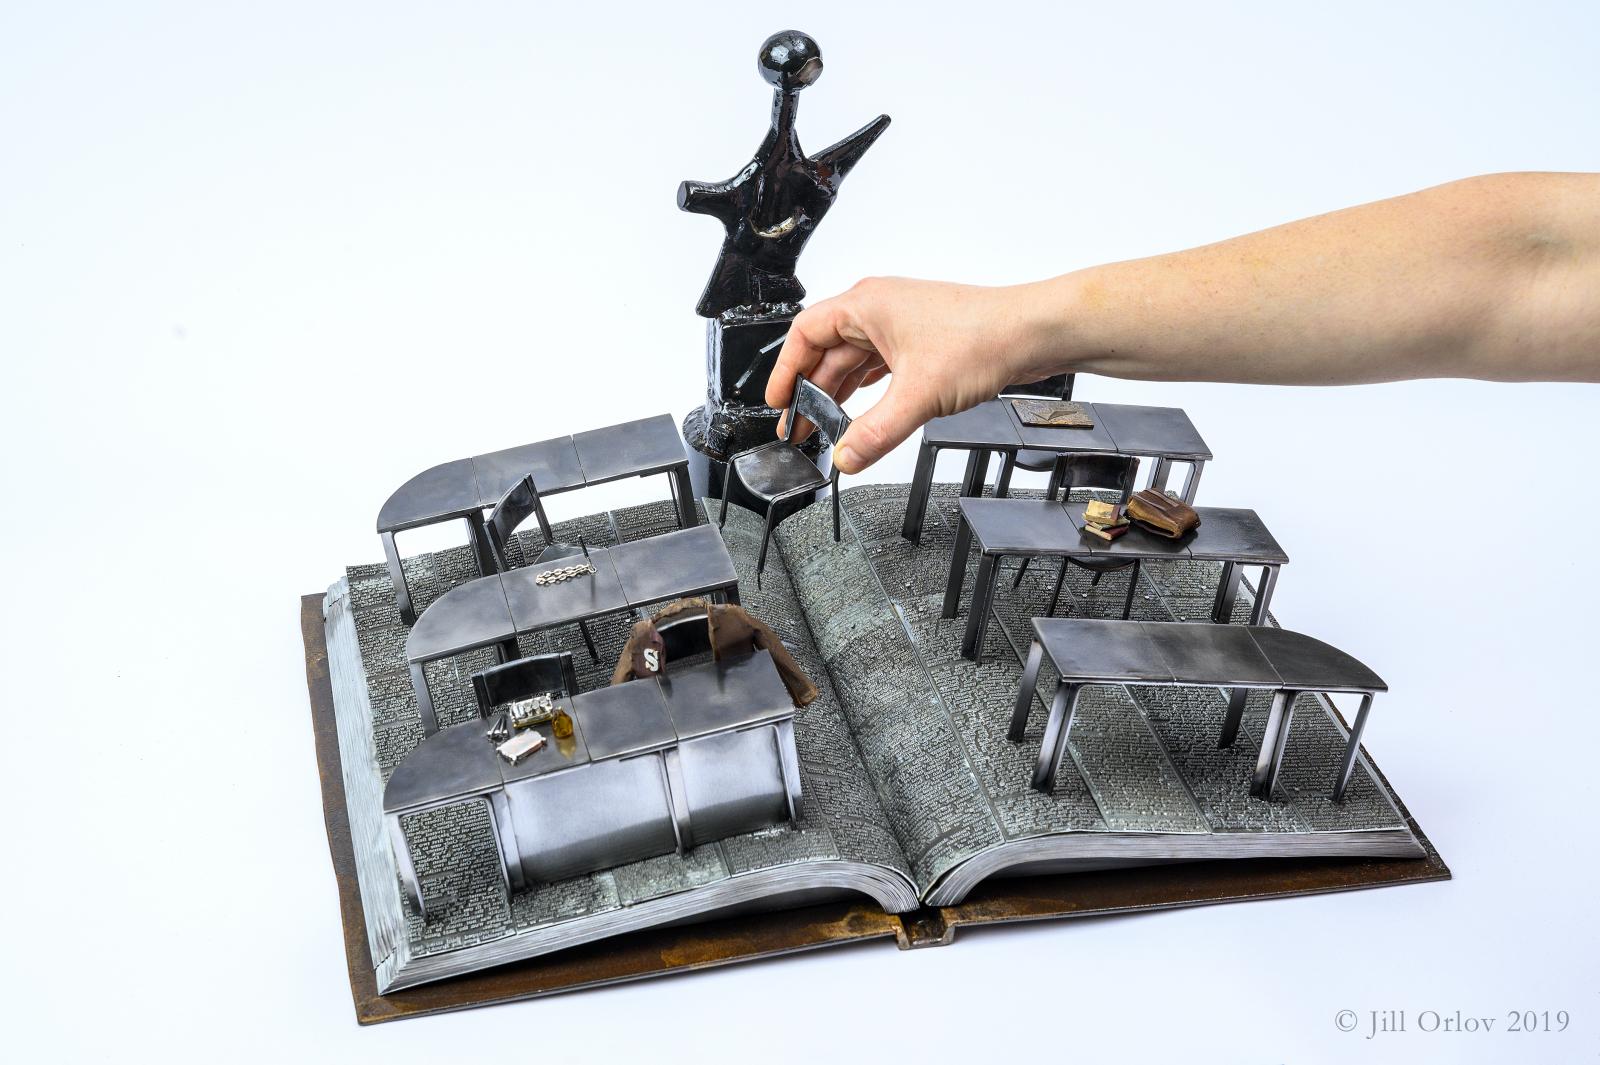 Based on the classic movie The Breakfast Club - a miniature vignette of the library scene set within a full scale book made of steel and other metals. All TIG welded construction.